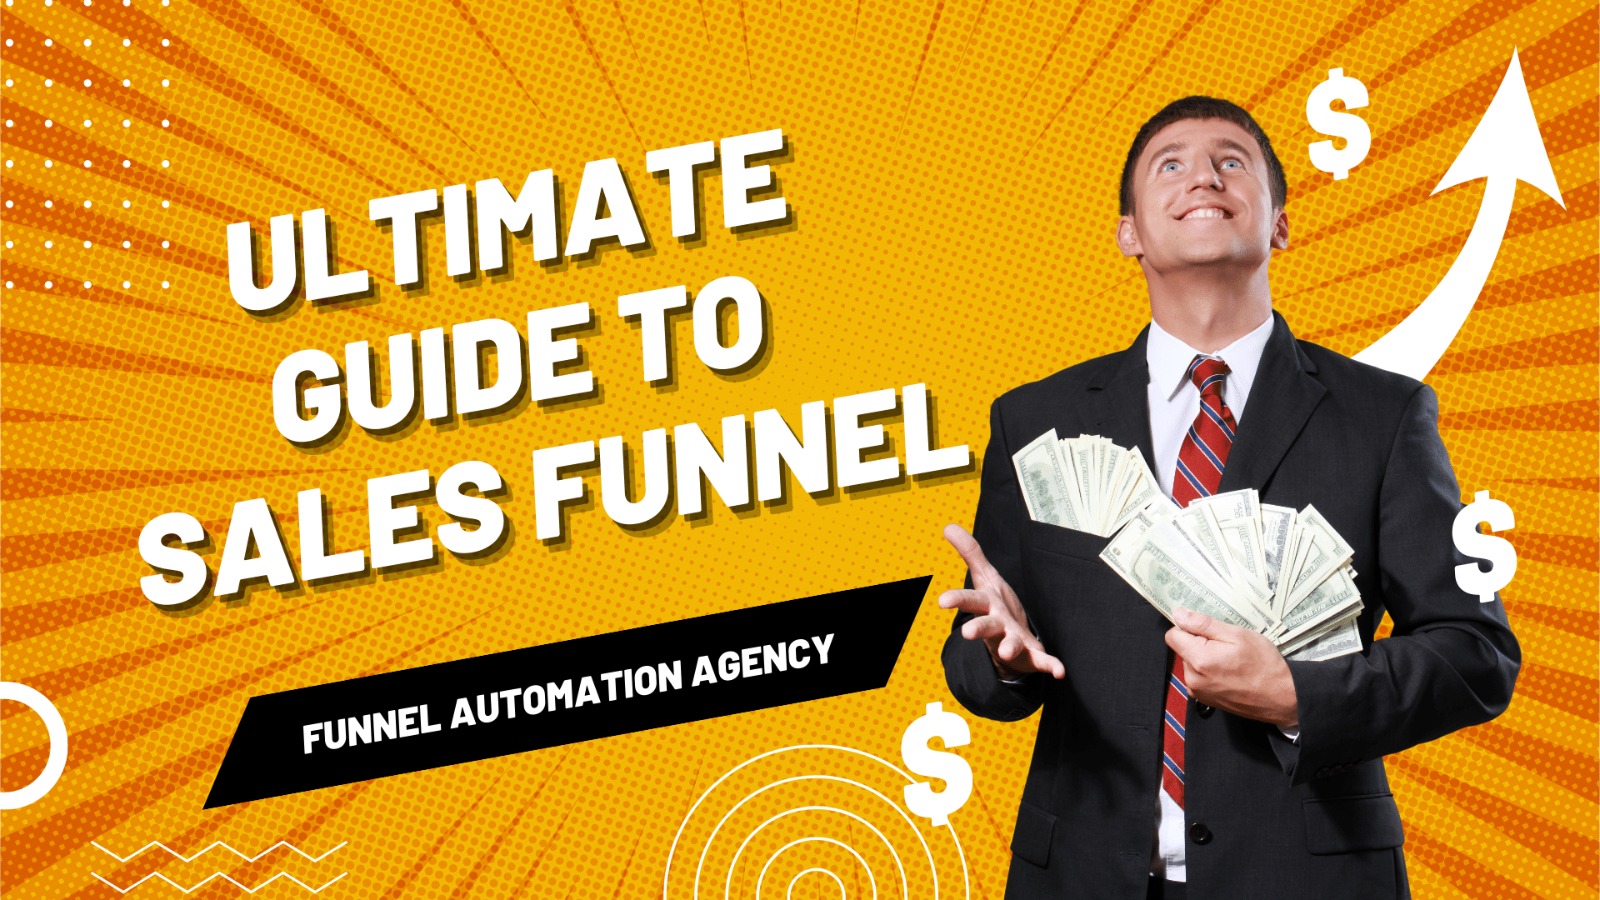 Ultimate Guide to Sales Funnels